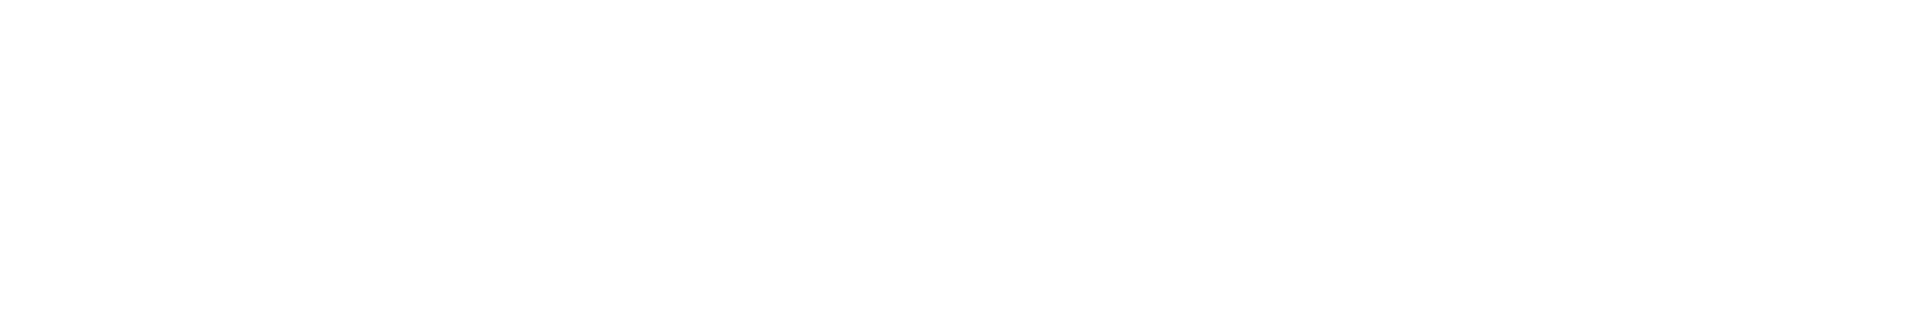 national-institute-for-labor-relations-research-logo-ver1